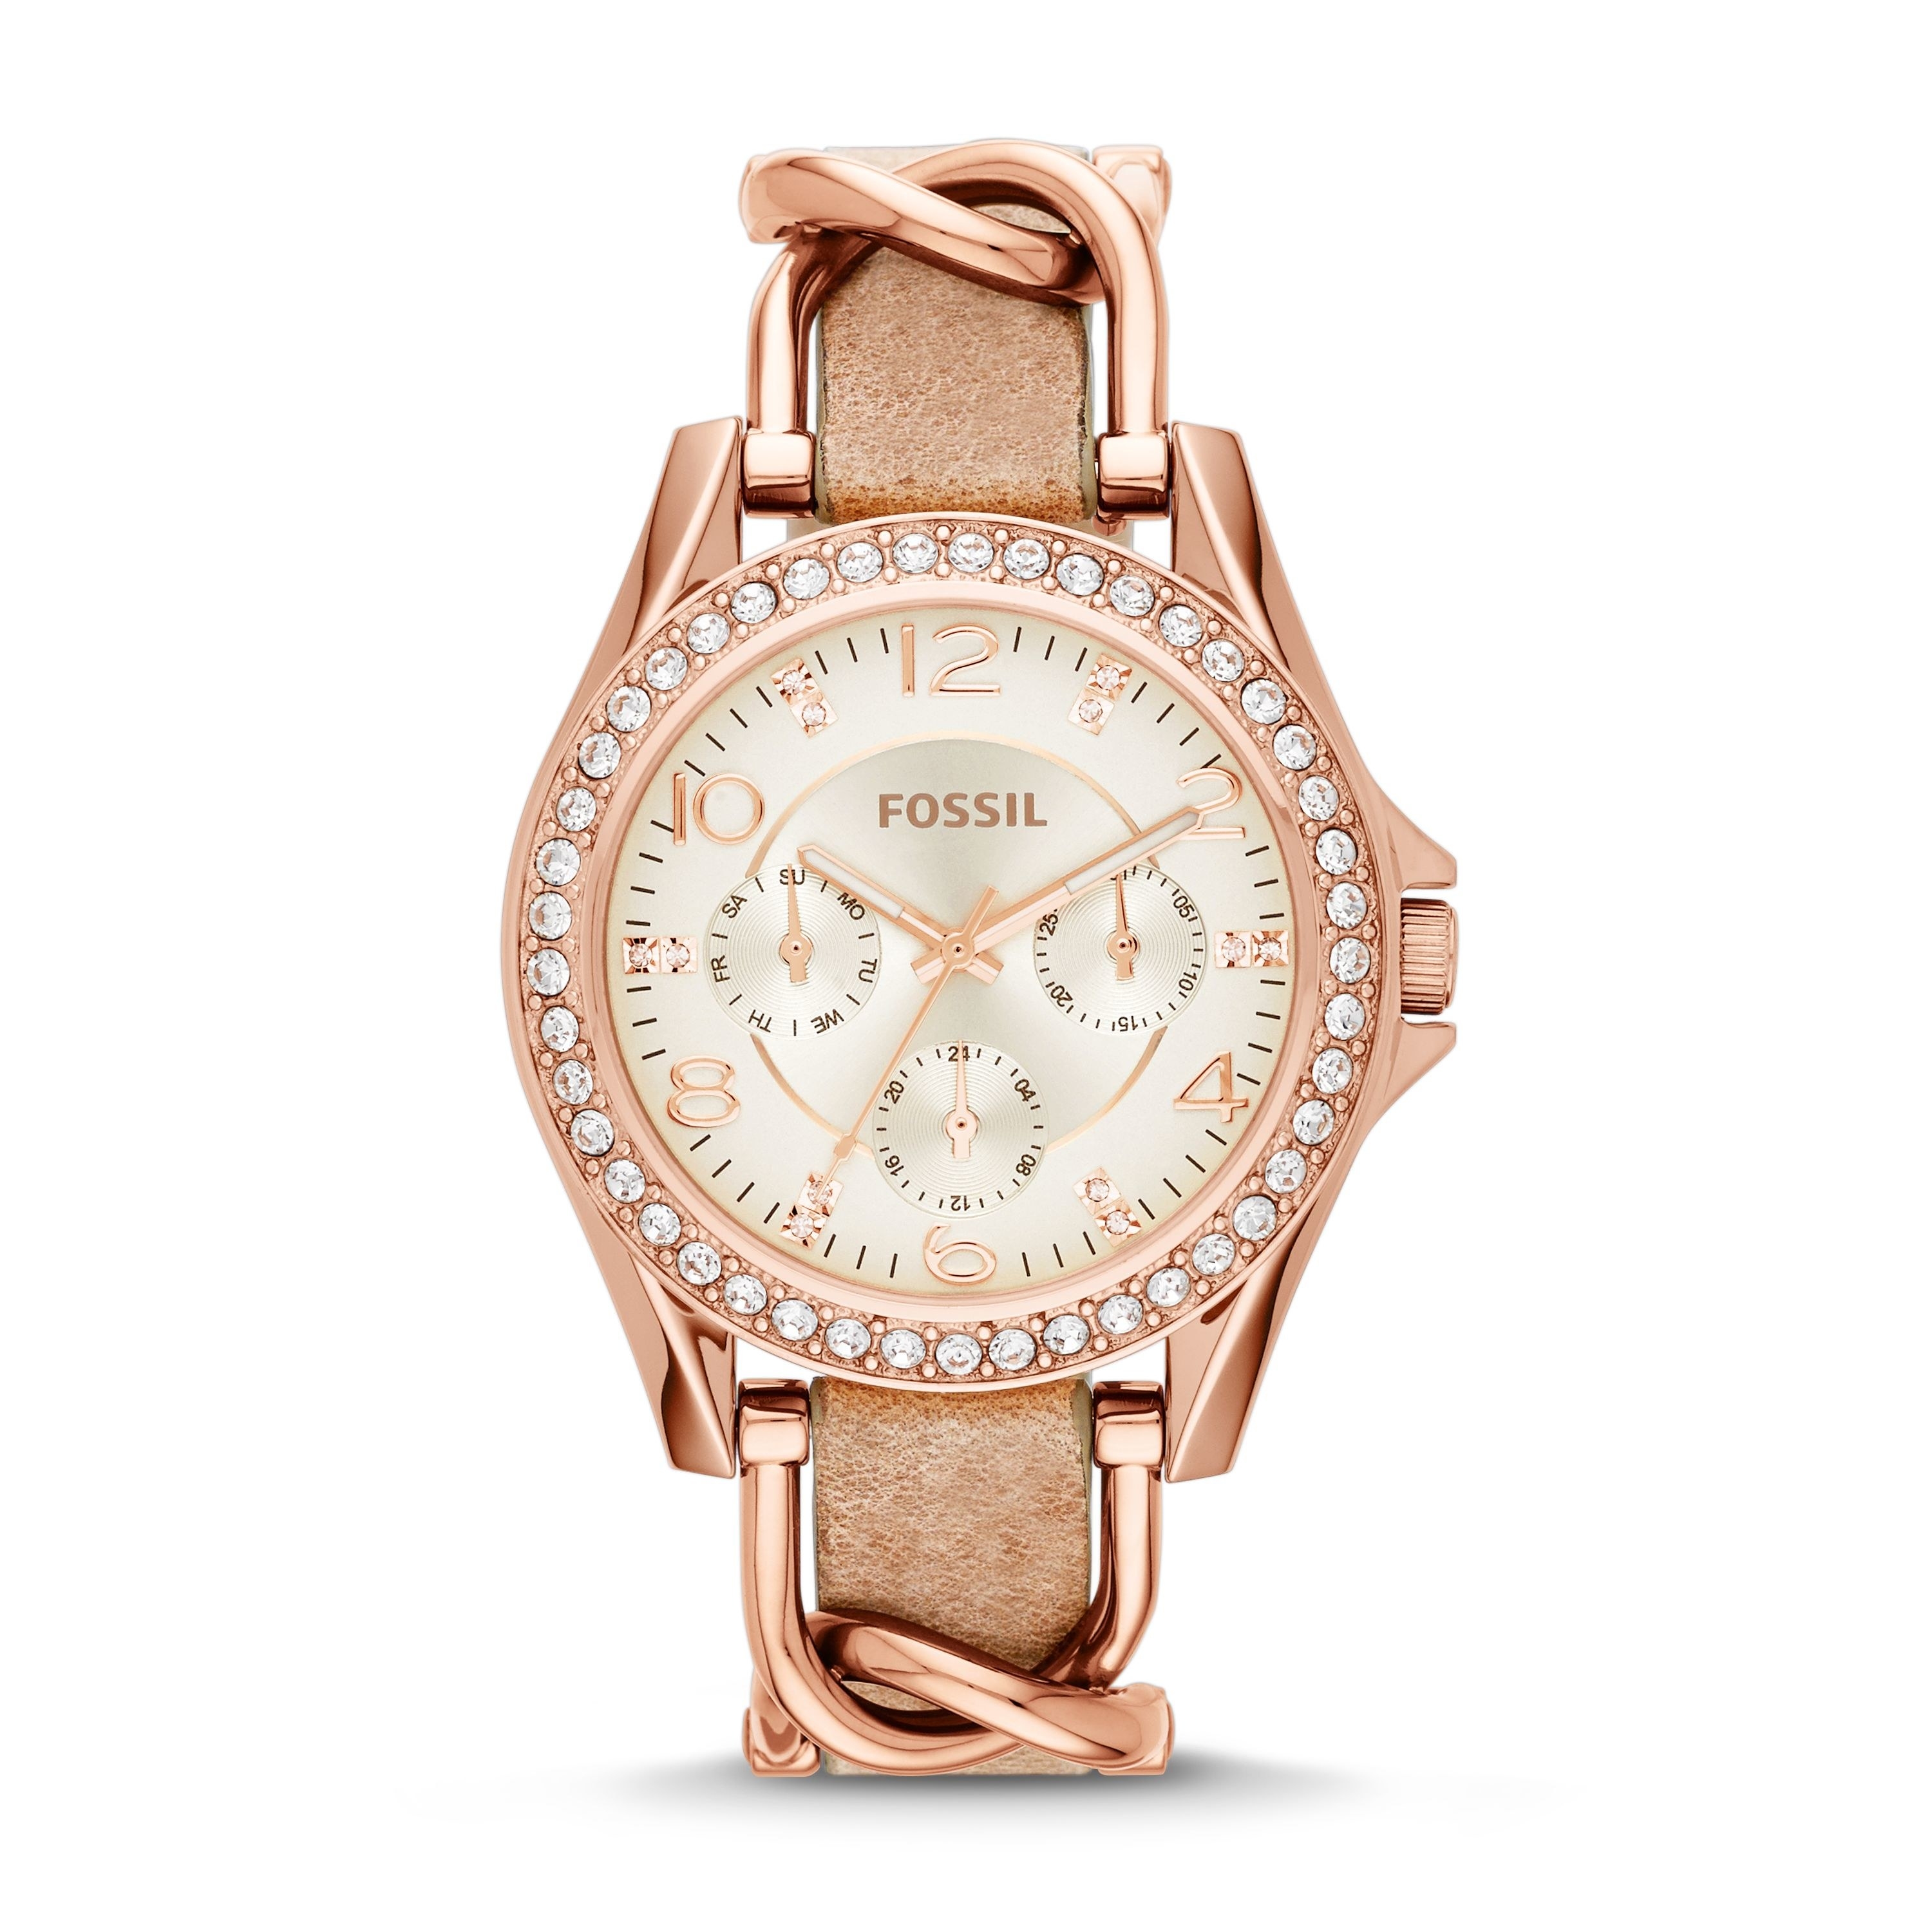 rose gold fossil watch with a skinny leather band